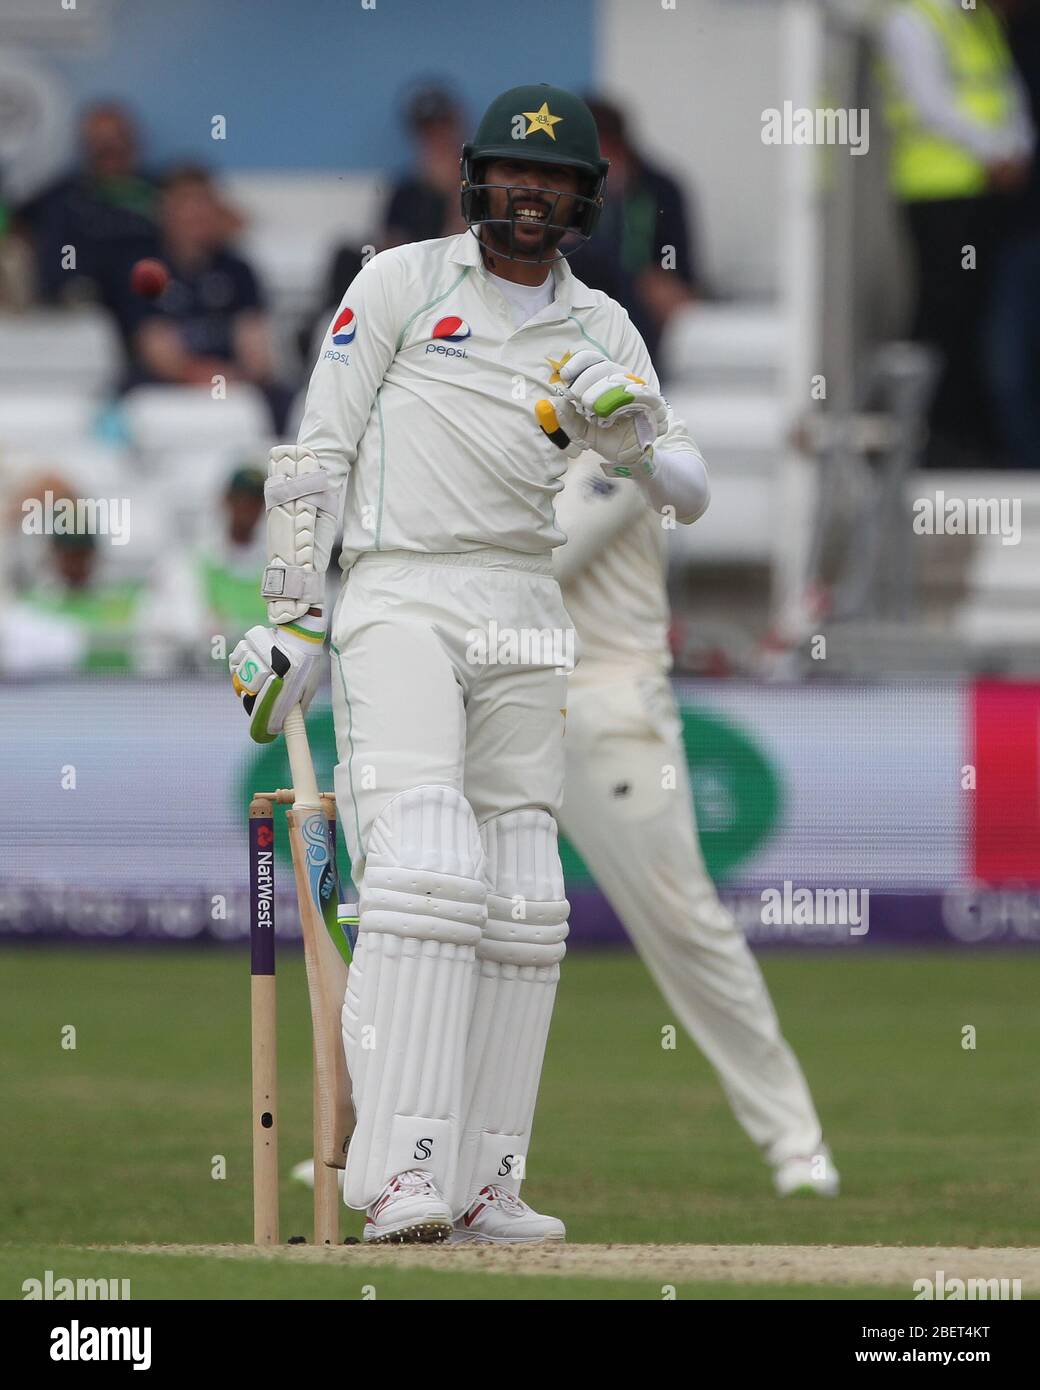 LEEDS, UK - JUNE 1ST Mohammed Amir of Pakistan during the first day of the Second Nat West Test match between England and Pakistan at Headingley Cricket Ground, Leeds on Friday 1st June 2018. (Credit: Mark Fletcher | MI News) Stock Photo